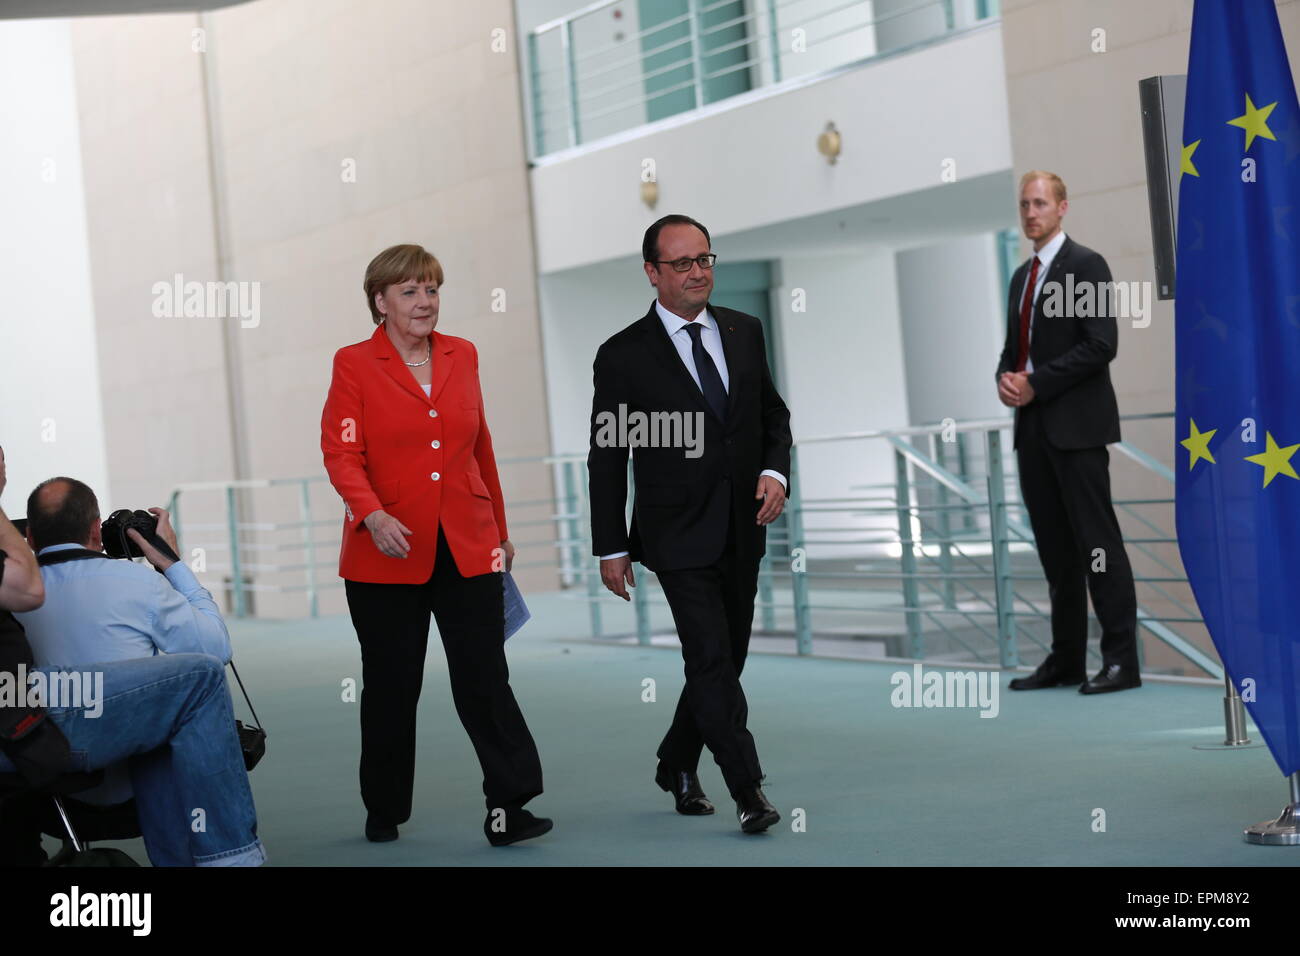 Berlin, Germany. 19th May, 2015. Francois Hollande at the Federal Chancellery in Berlin for a joint press meeting with Angela Merkel regarding climate protection and other European issues. Credit:  Simone Kuhlmey/Pacific Press/Alamy Live News Stock Photo